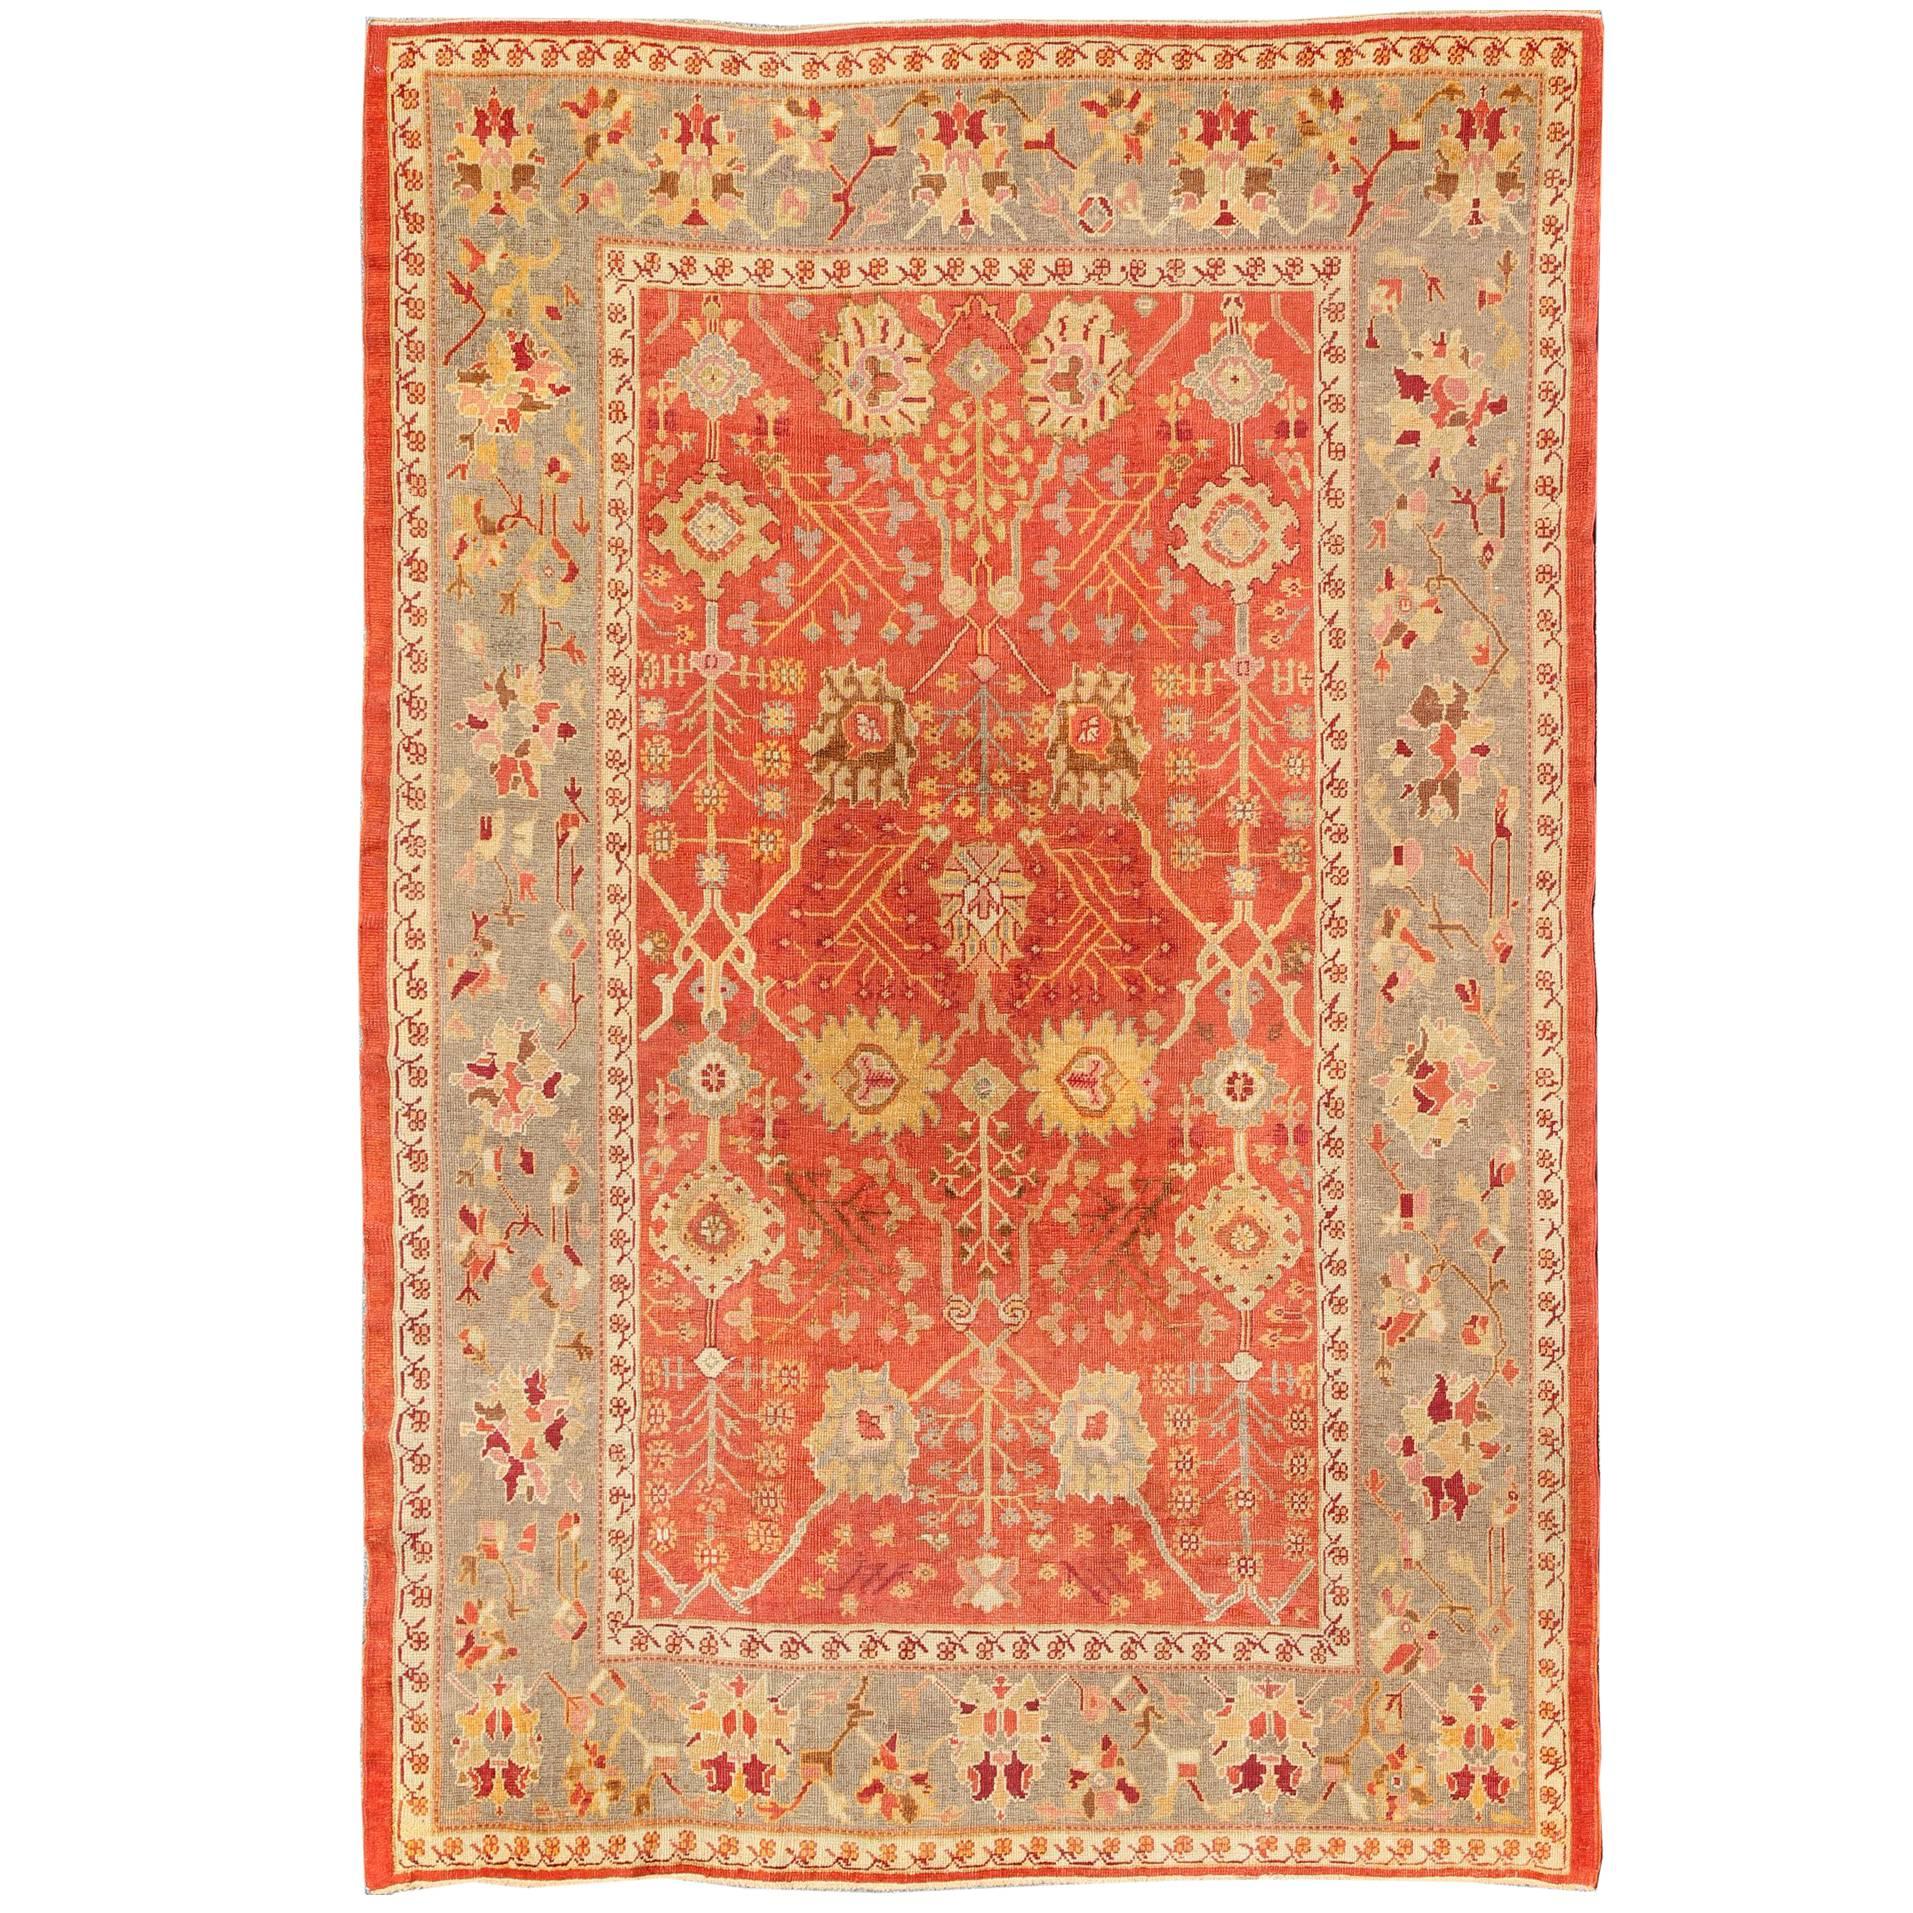  Antique Turkish Oushak Rug With All-Over Design On Orange Red Gray Border For Sale